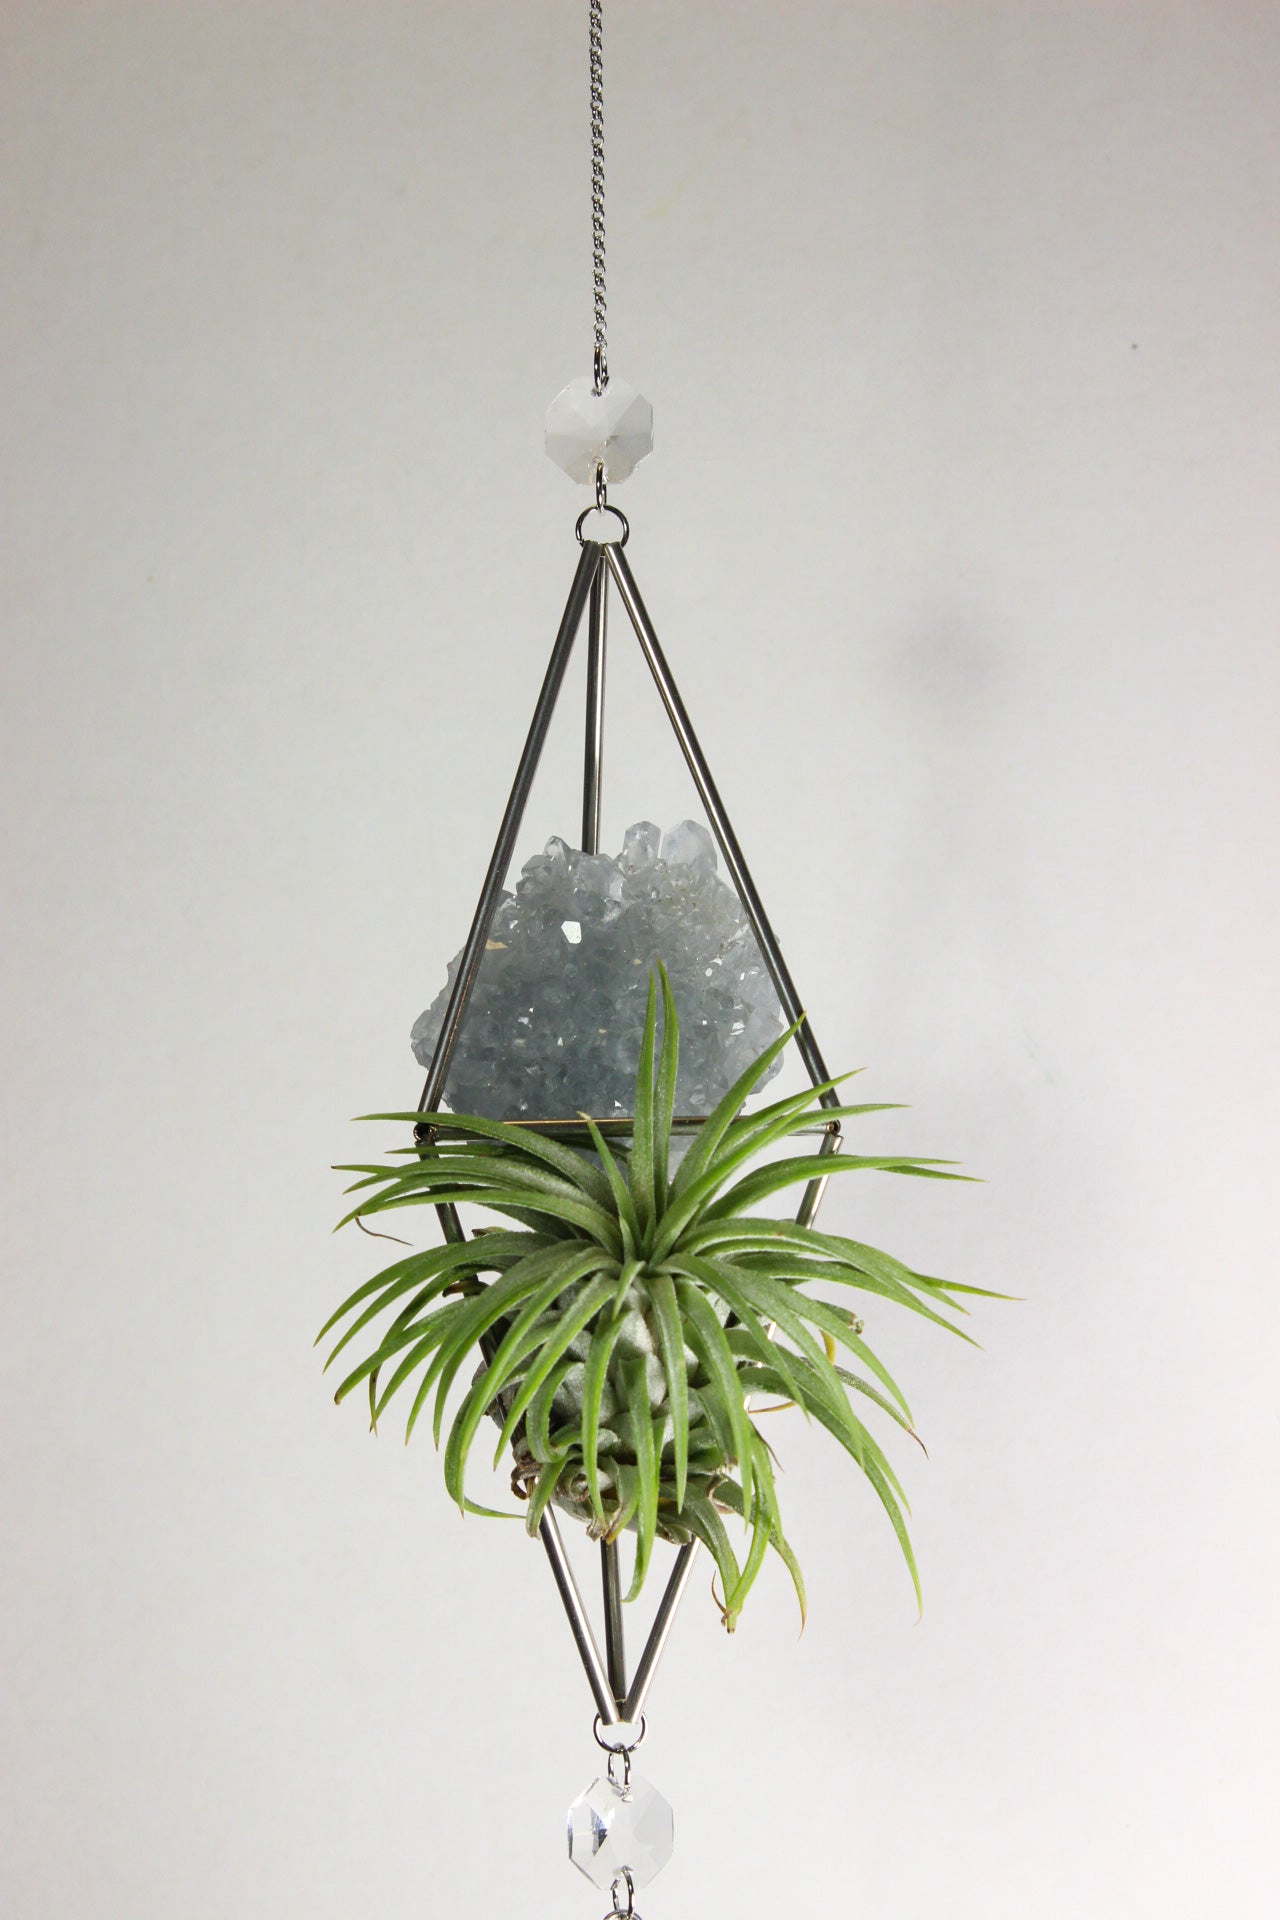 Celestite Crystal Stained Glass Sun Catcher with Air Plant